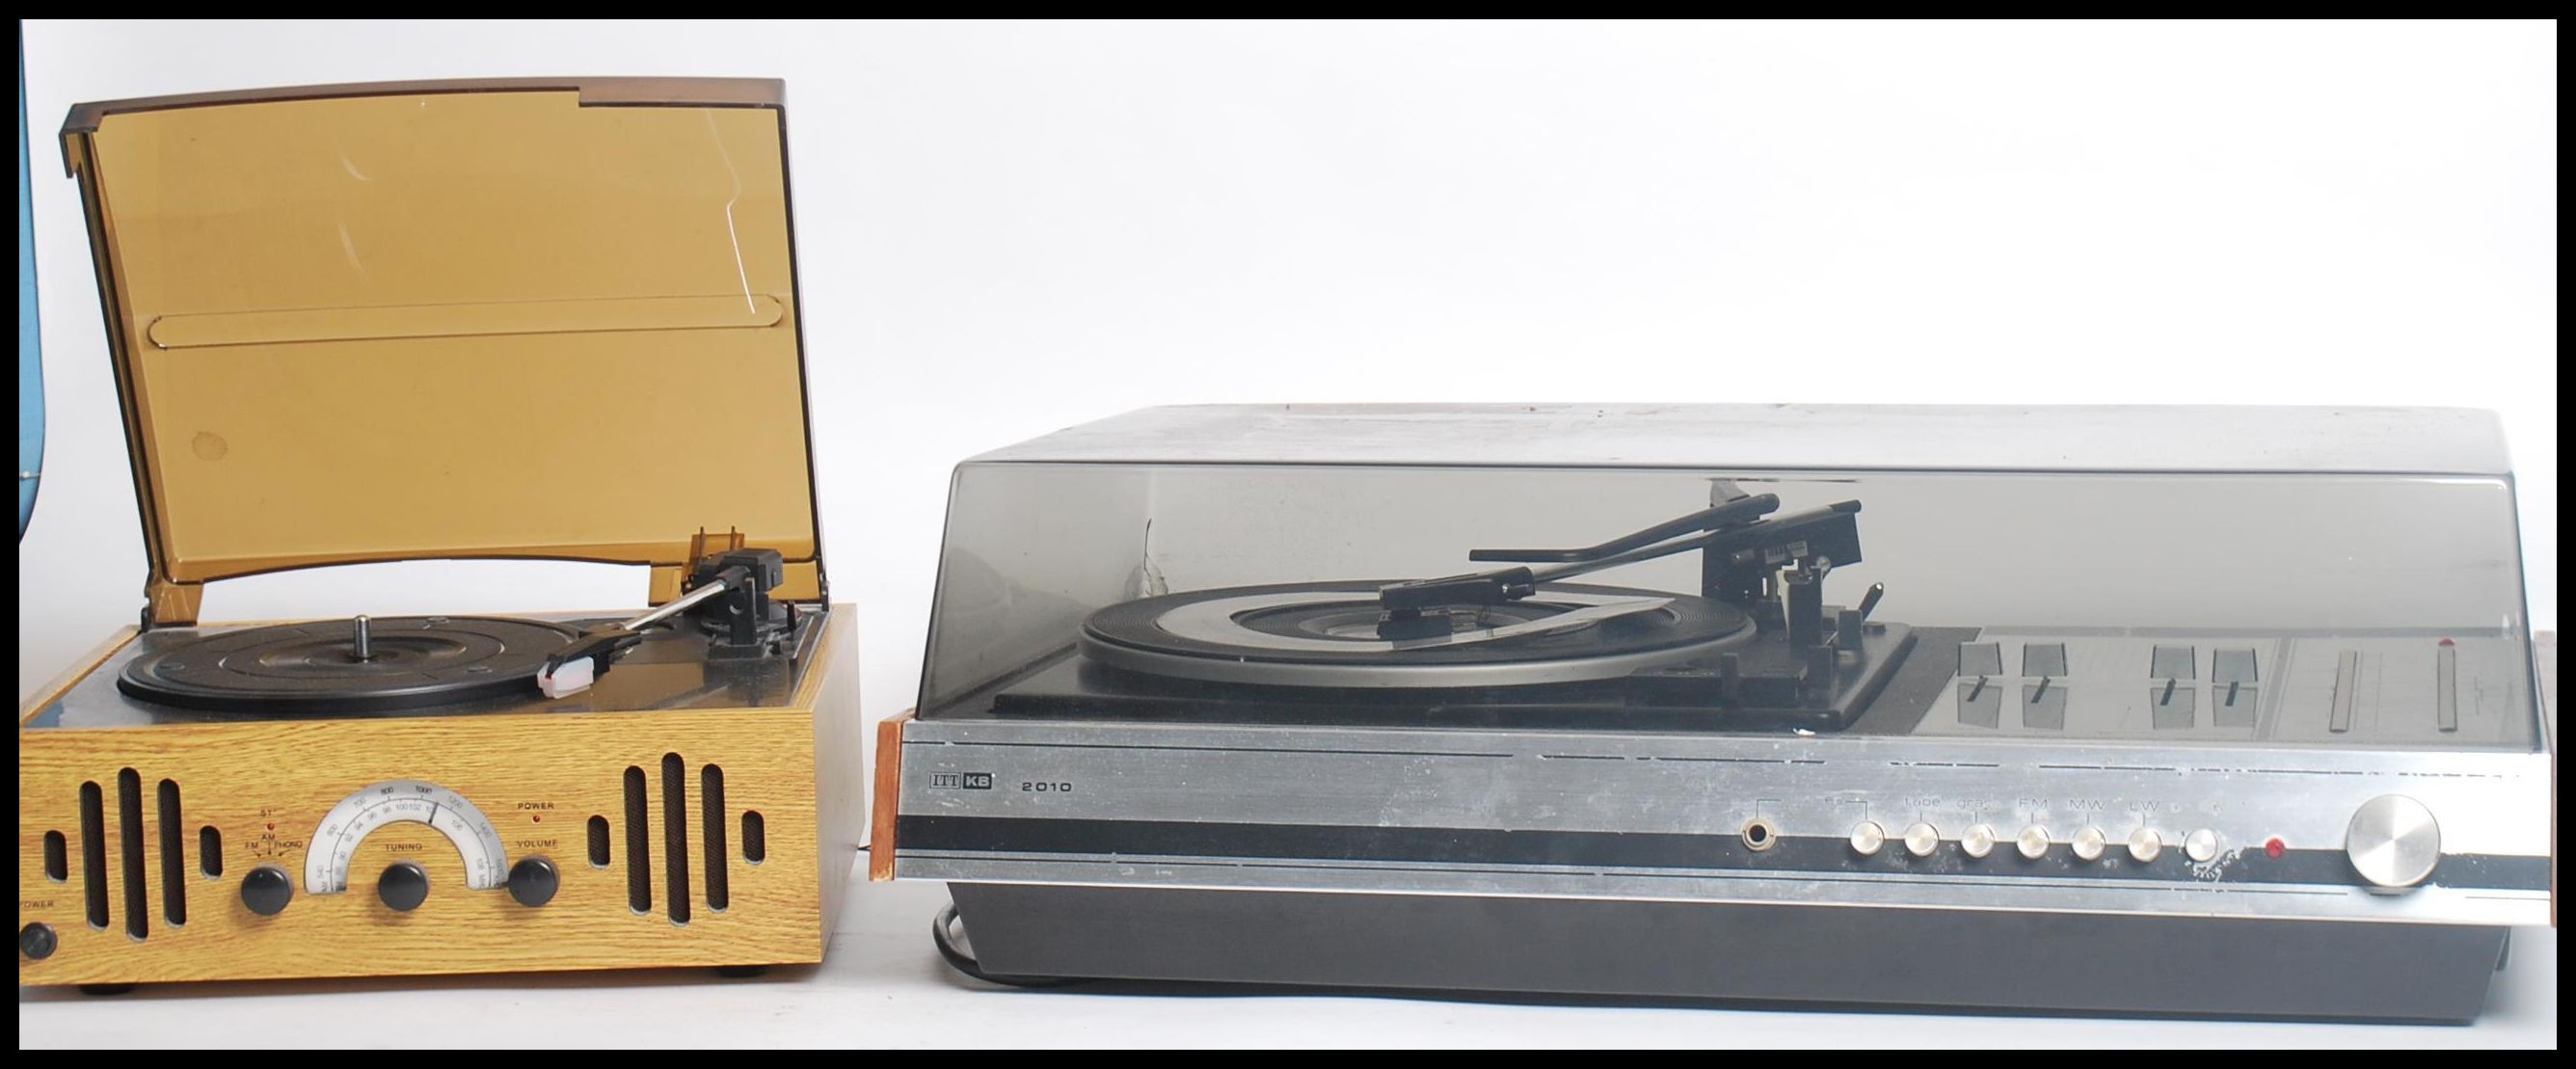 A vintage / retro 20th century stereo record player. ITT KB unit stereo, model KA.2010 with a BSR